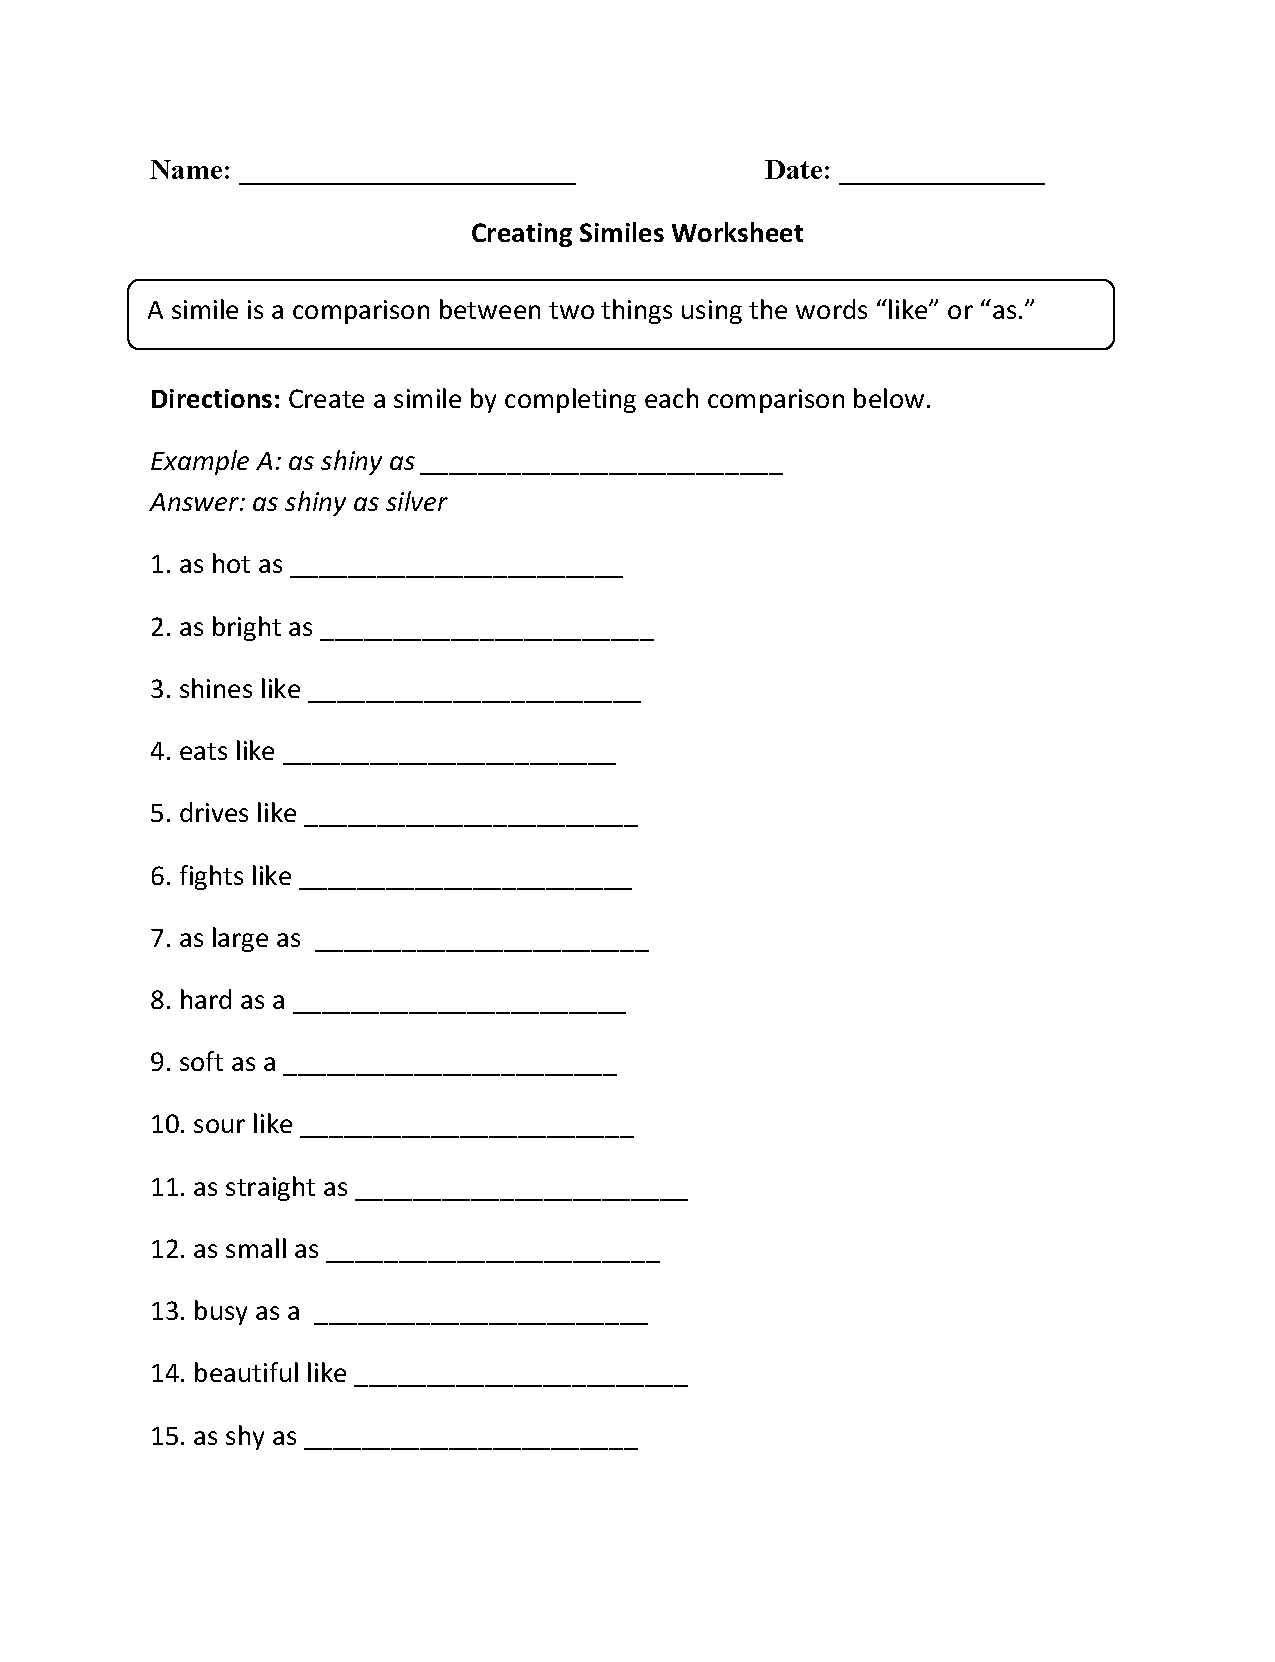 simile and metaphor worksheets - DriverLayer Search Engine